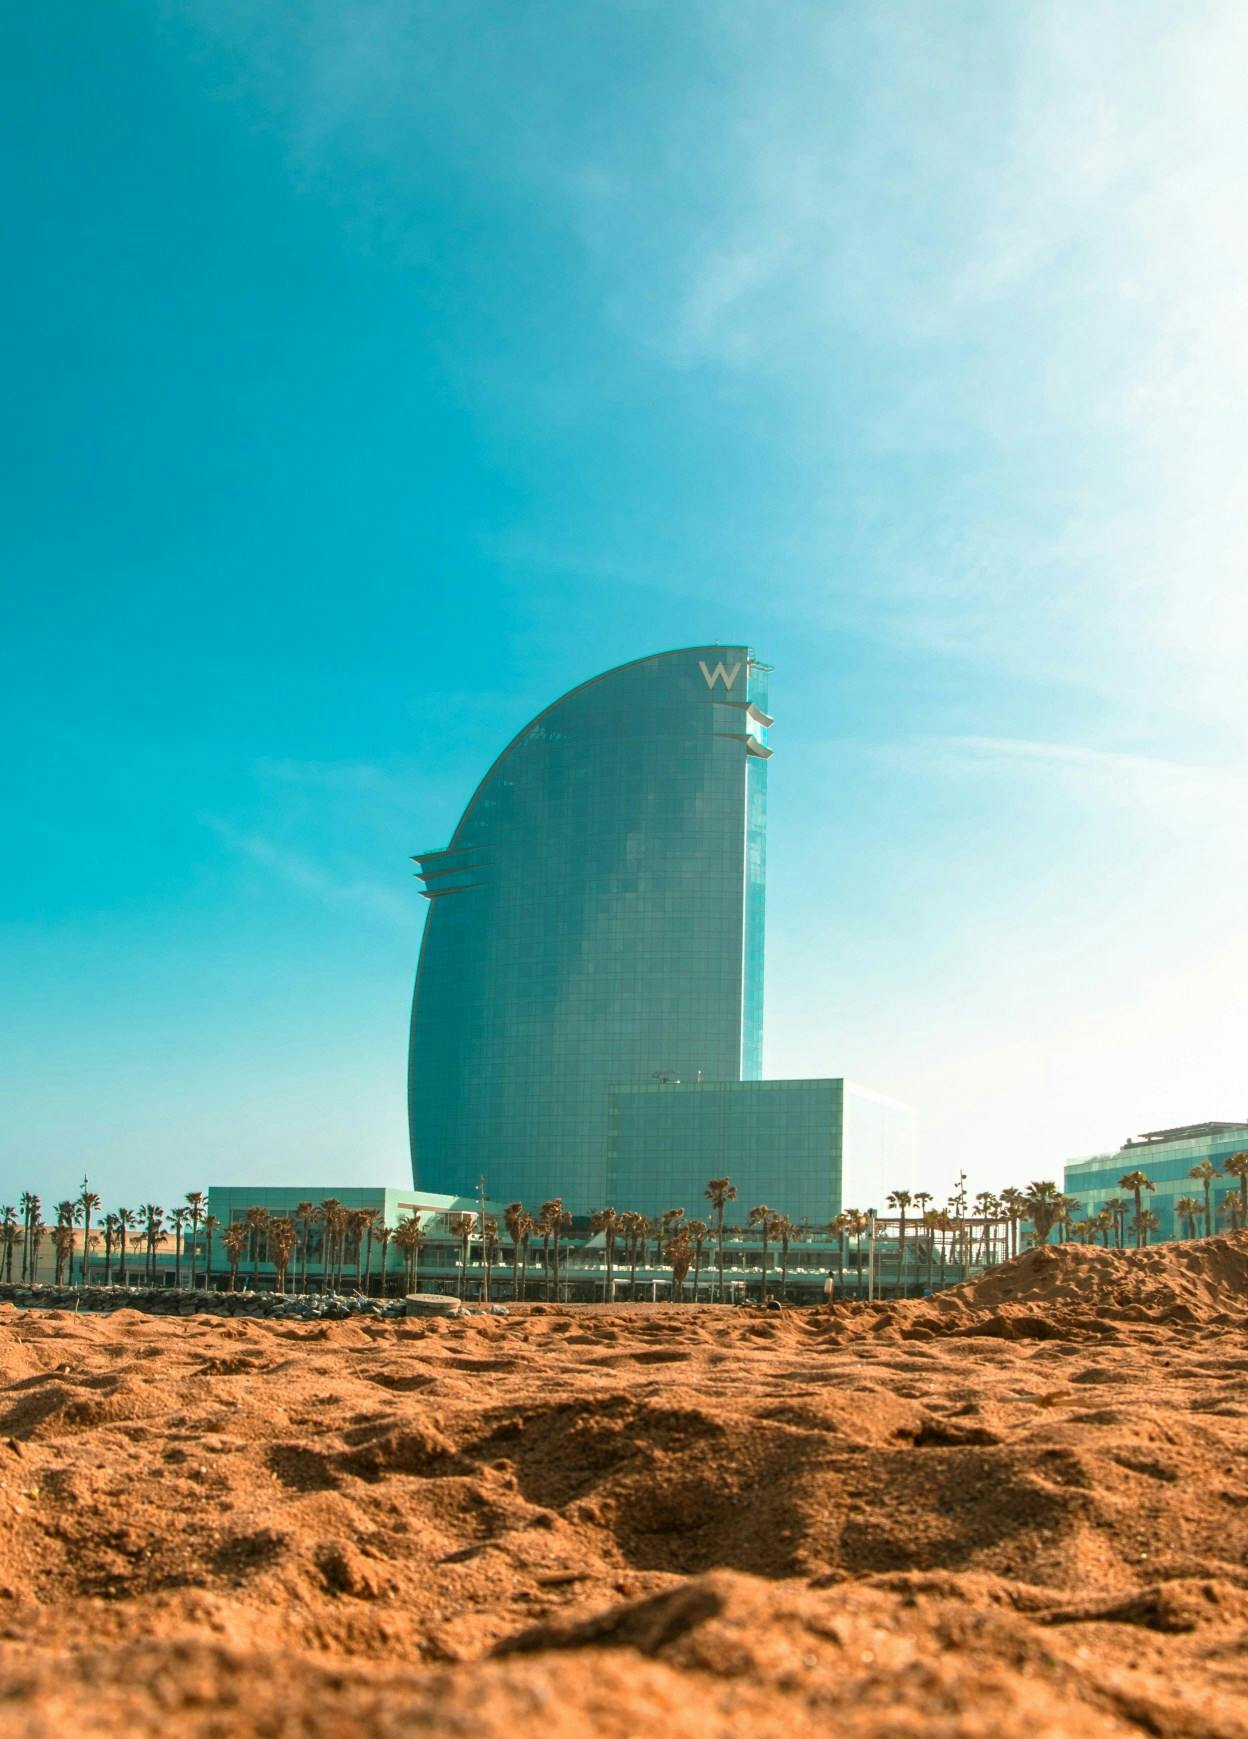 The W Hotel Barcelona, shaped like a wing, protrudes from the landscape and the sandy beach in the foreground. 